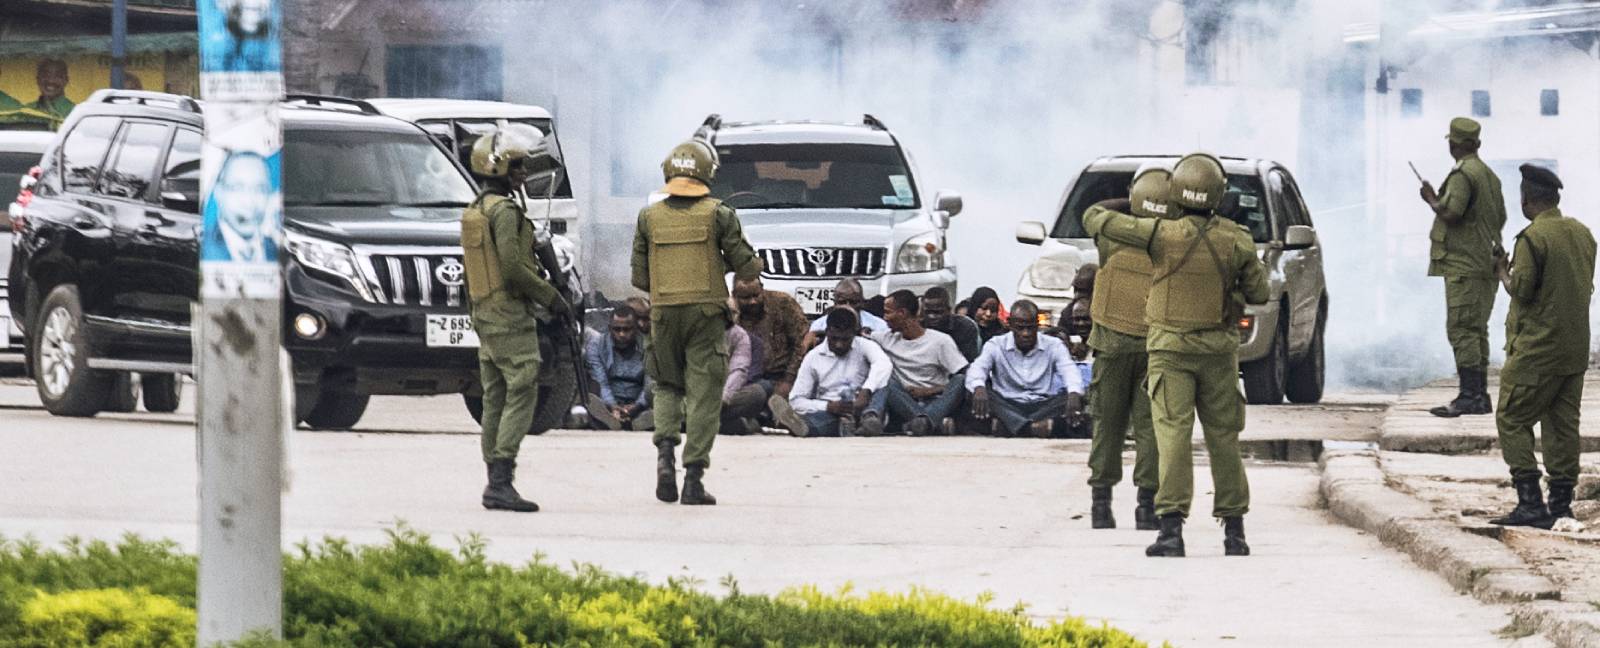 Anti-riot police in Zanzibar guarding a group of men during opposition protests the day after the 2020 presidential election. (Photo: AFP)